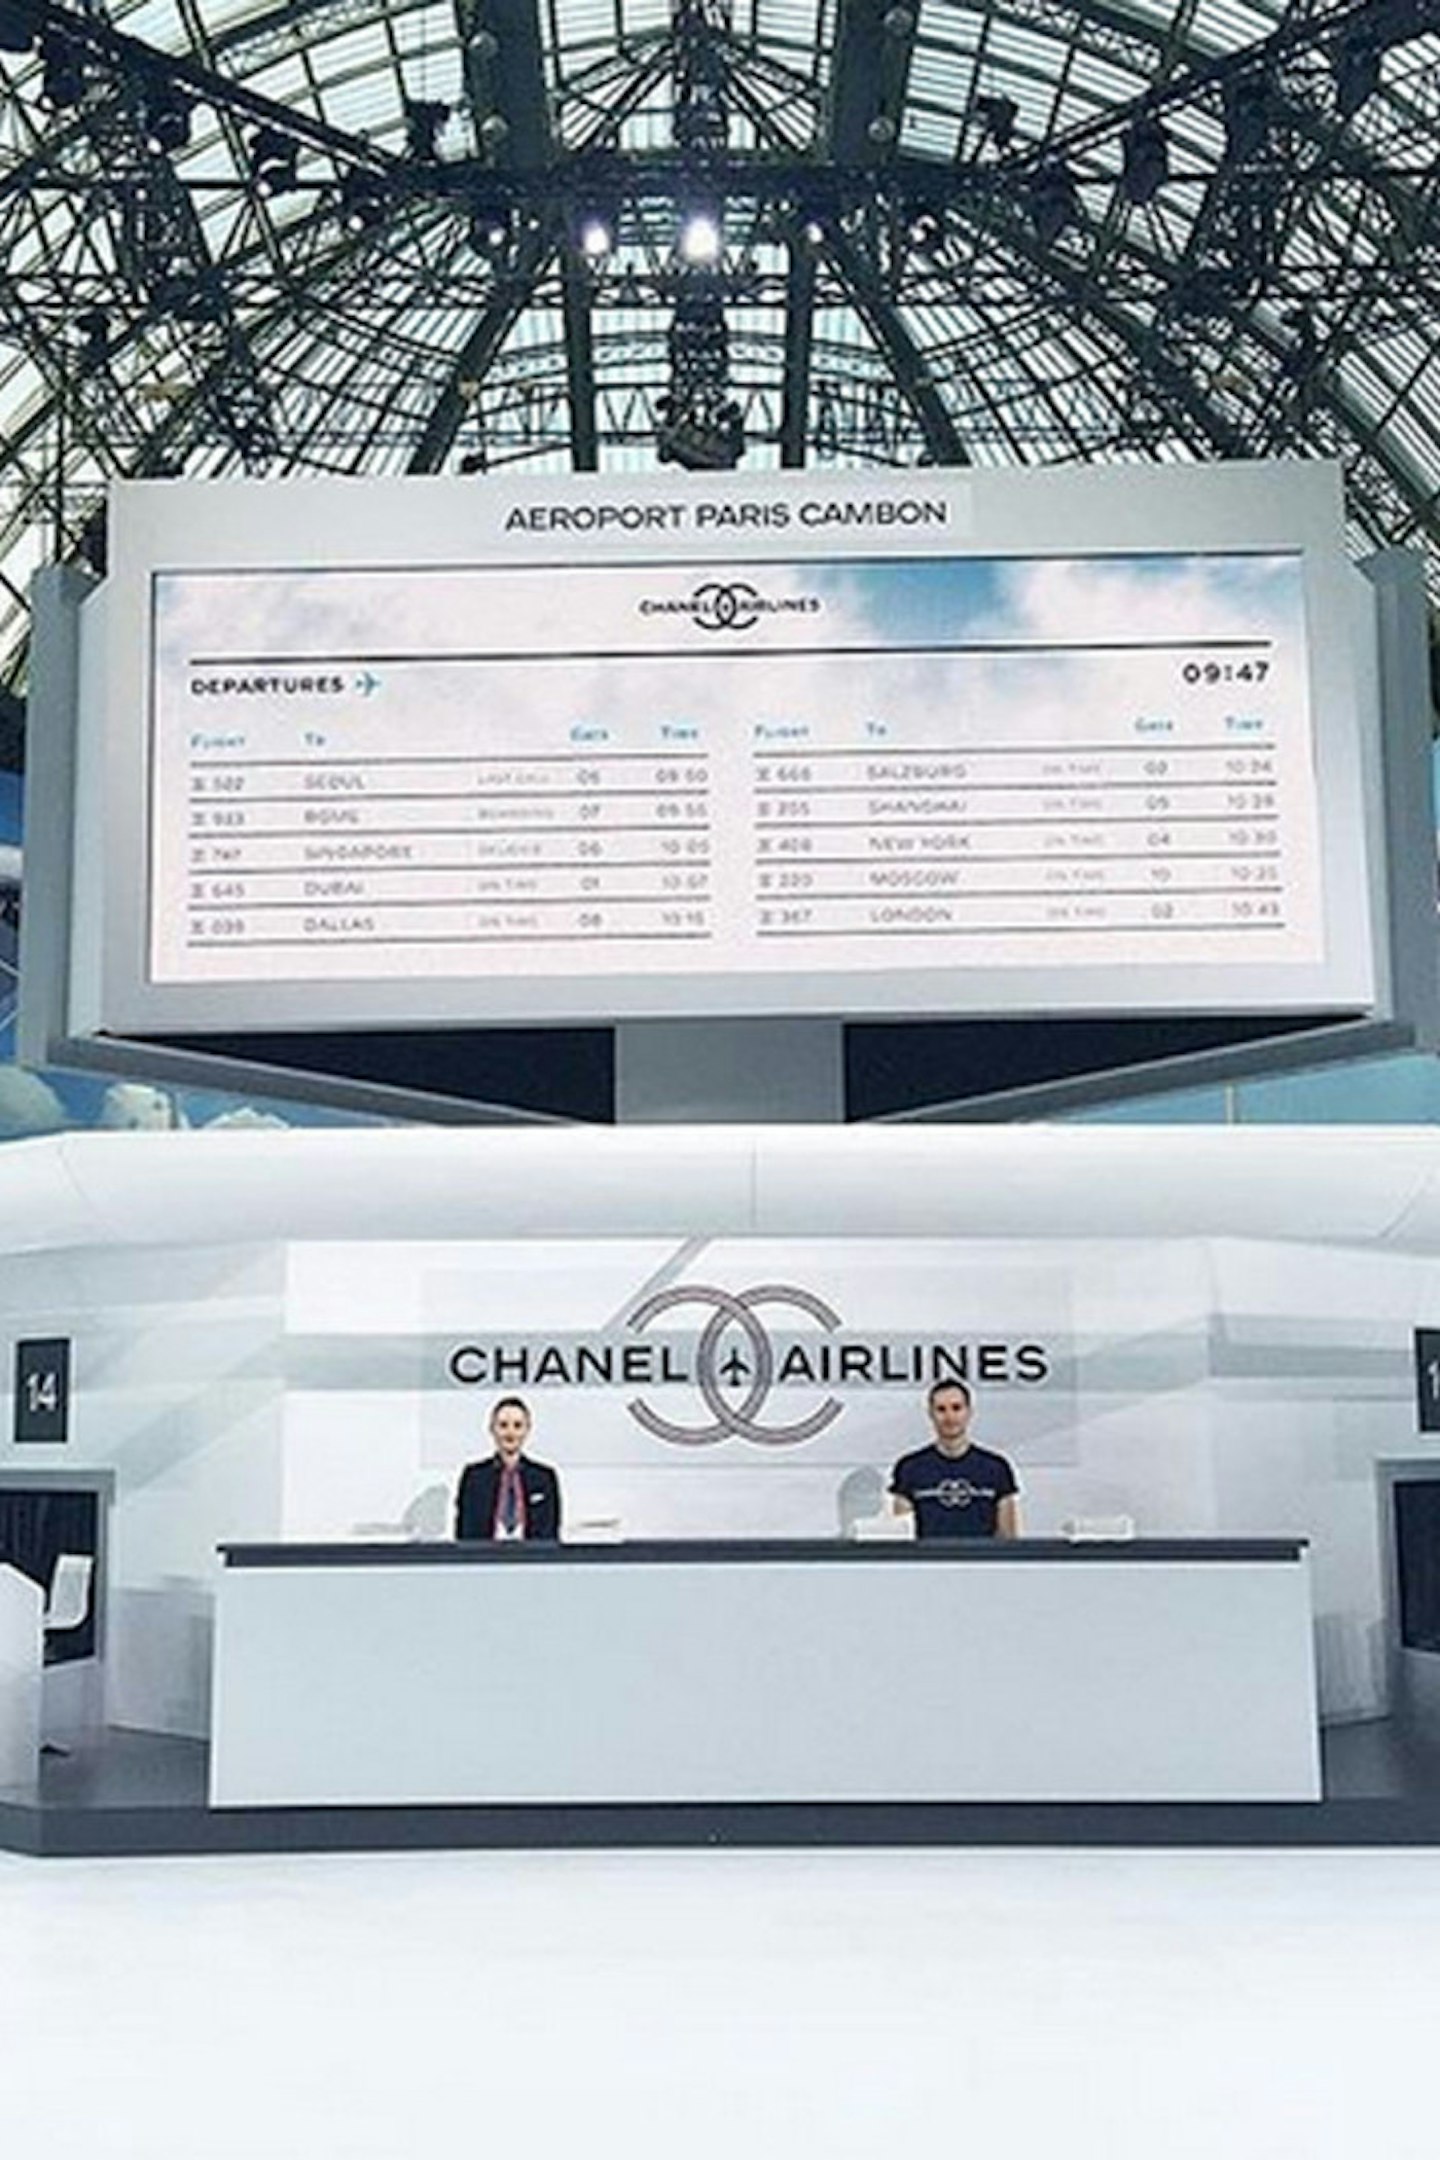 All Aboard Chanel Airlines! Karl Lagerfeld Creates A Chanelegant Airport